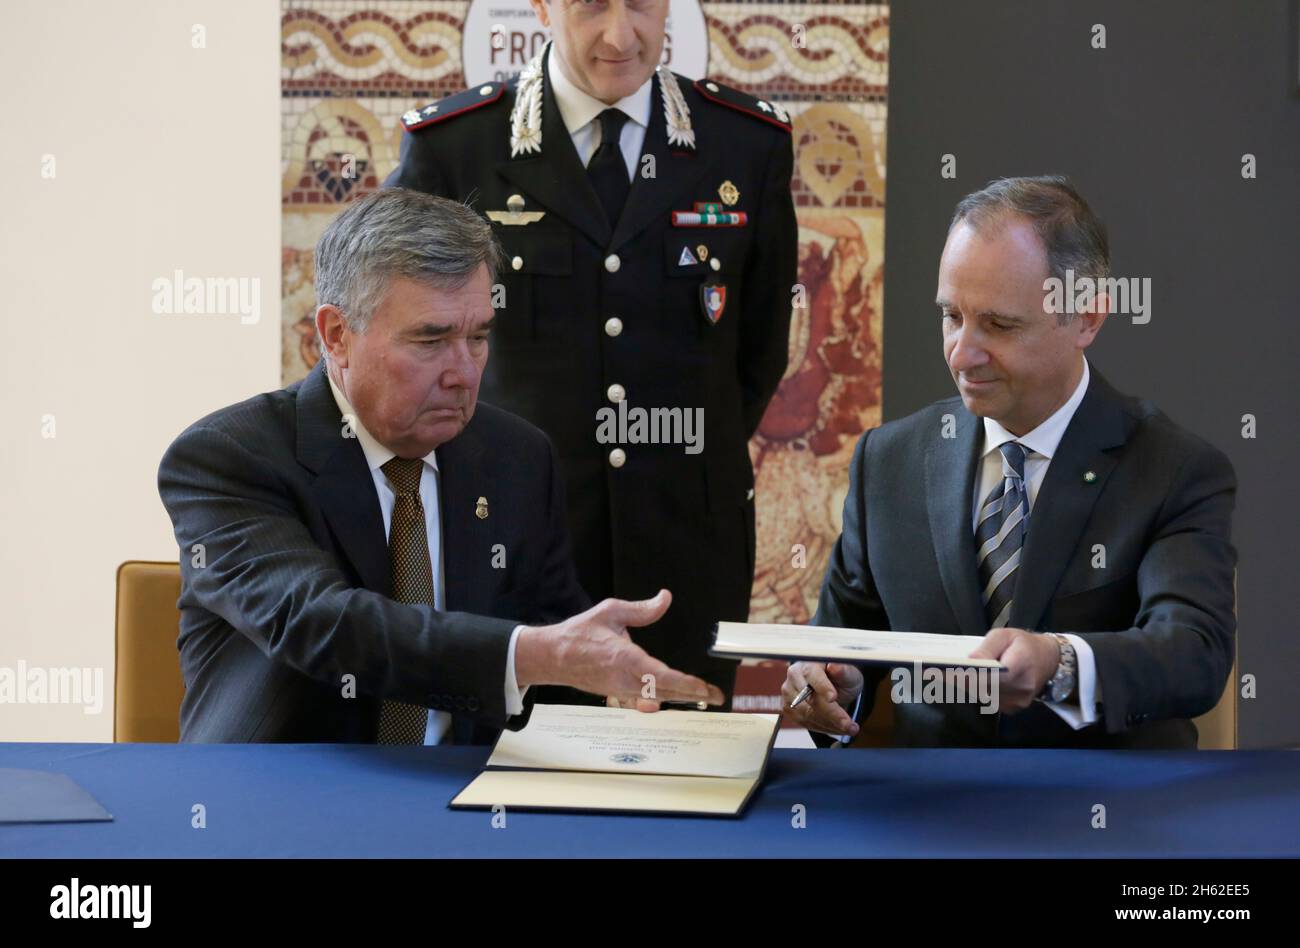 U.S. Customs and Border Protection Commissioner R. Gil Kerlikowske and Italian Ambassador to the United States Ambassador Armando Varricchio swap formal documents during a ceremony repatriating historic artifacts to the government of Italy at the Italian Embassy in Washington, D.C., December 9, 2016 Stock Photo